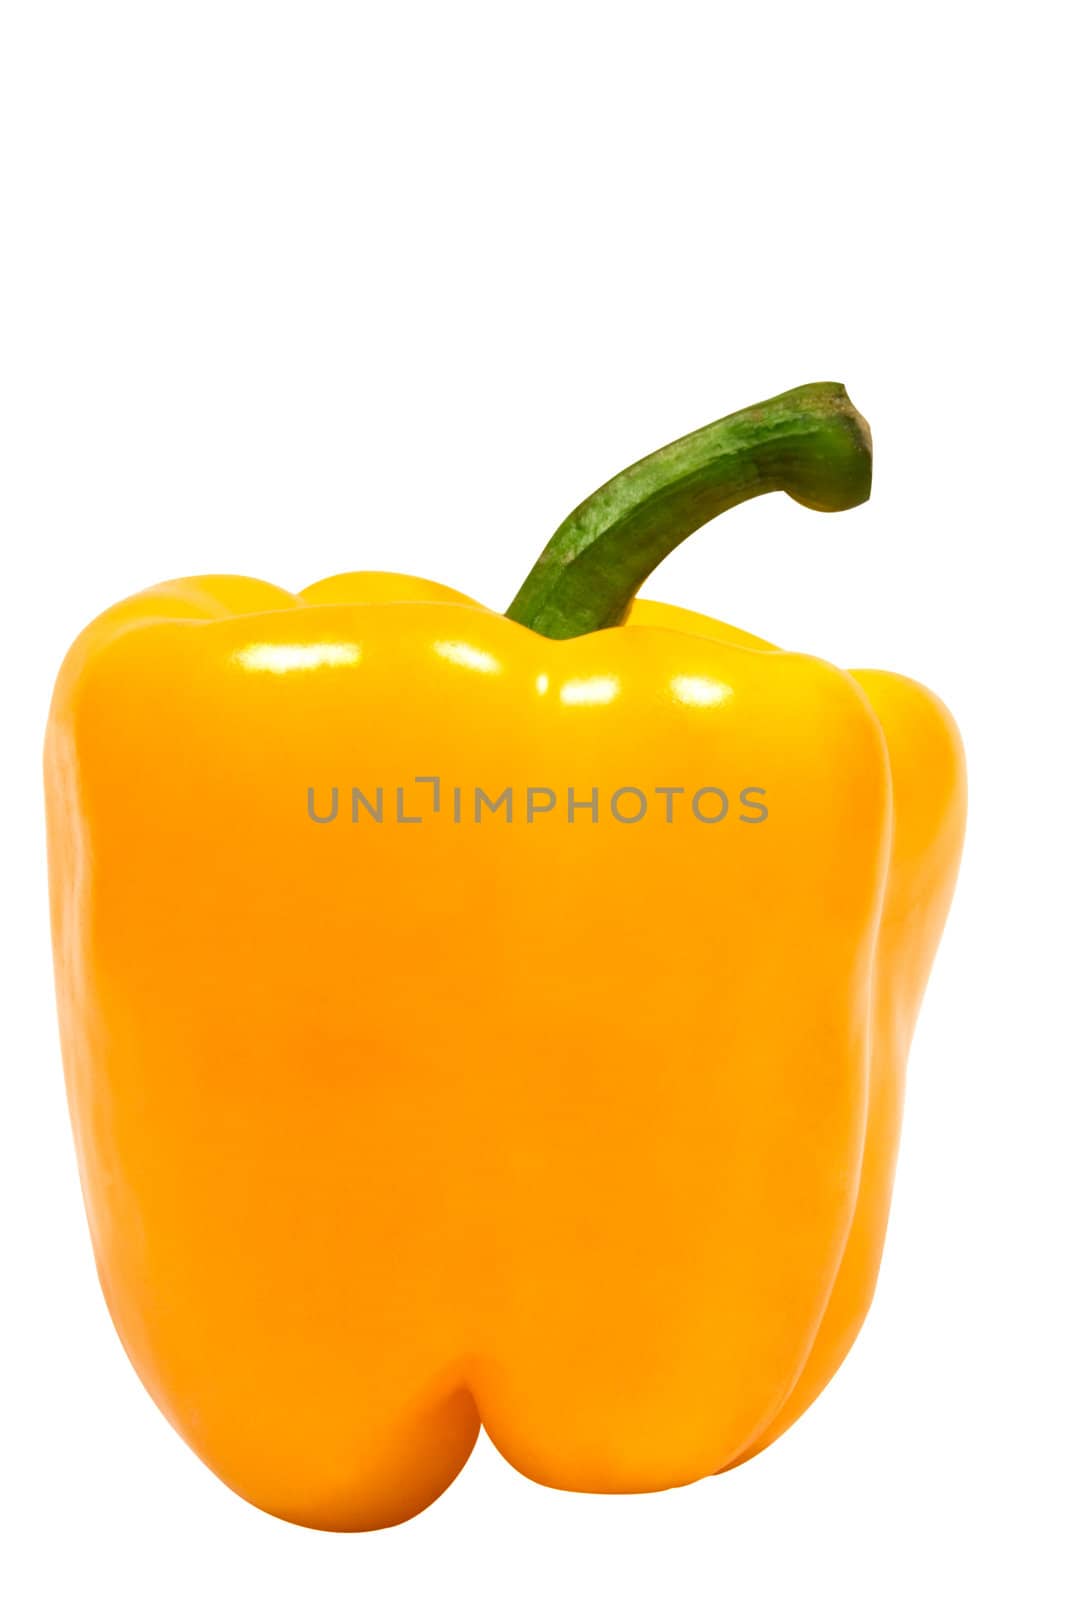 Yellow pepper isolated on a white background. File contains clipping path.